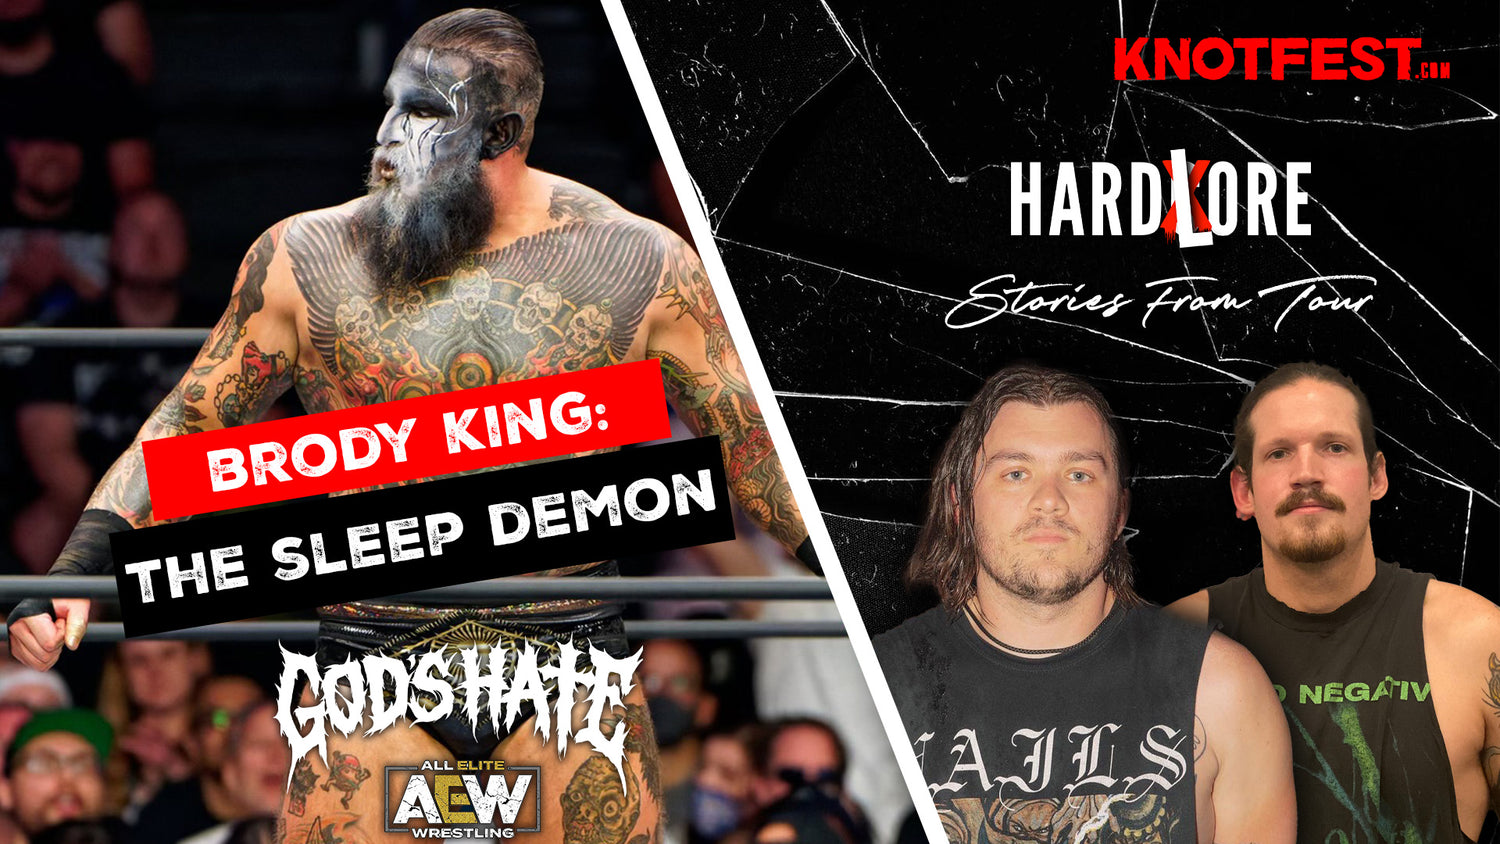 HardLore: Stories From Tour | Brody King: The Sleep Demon